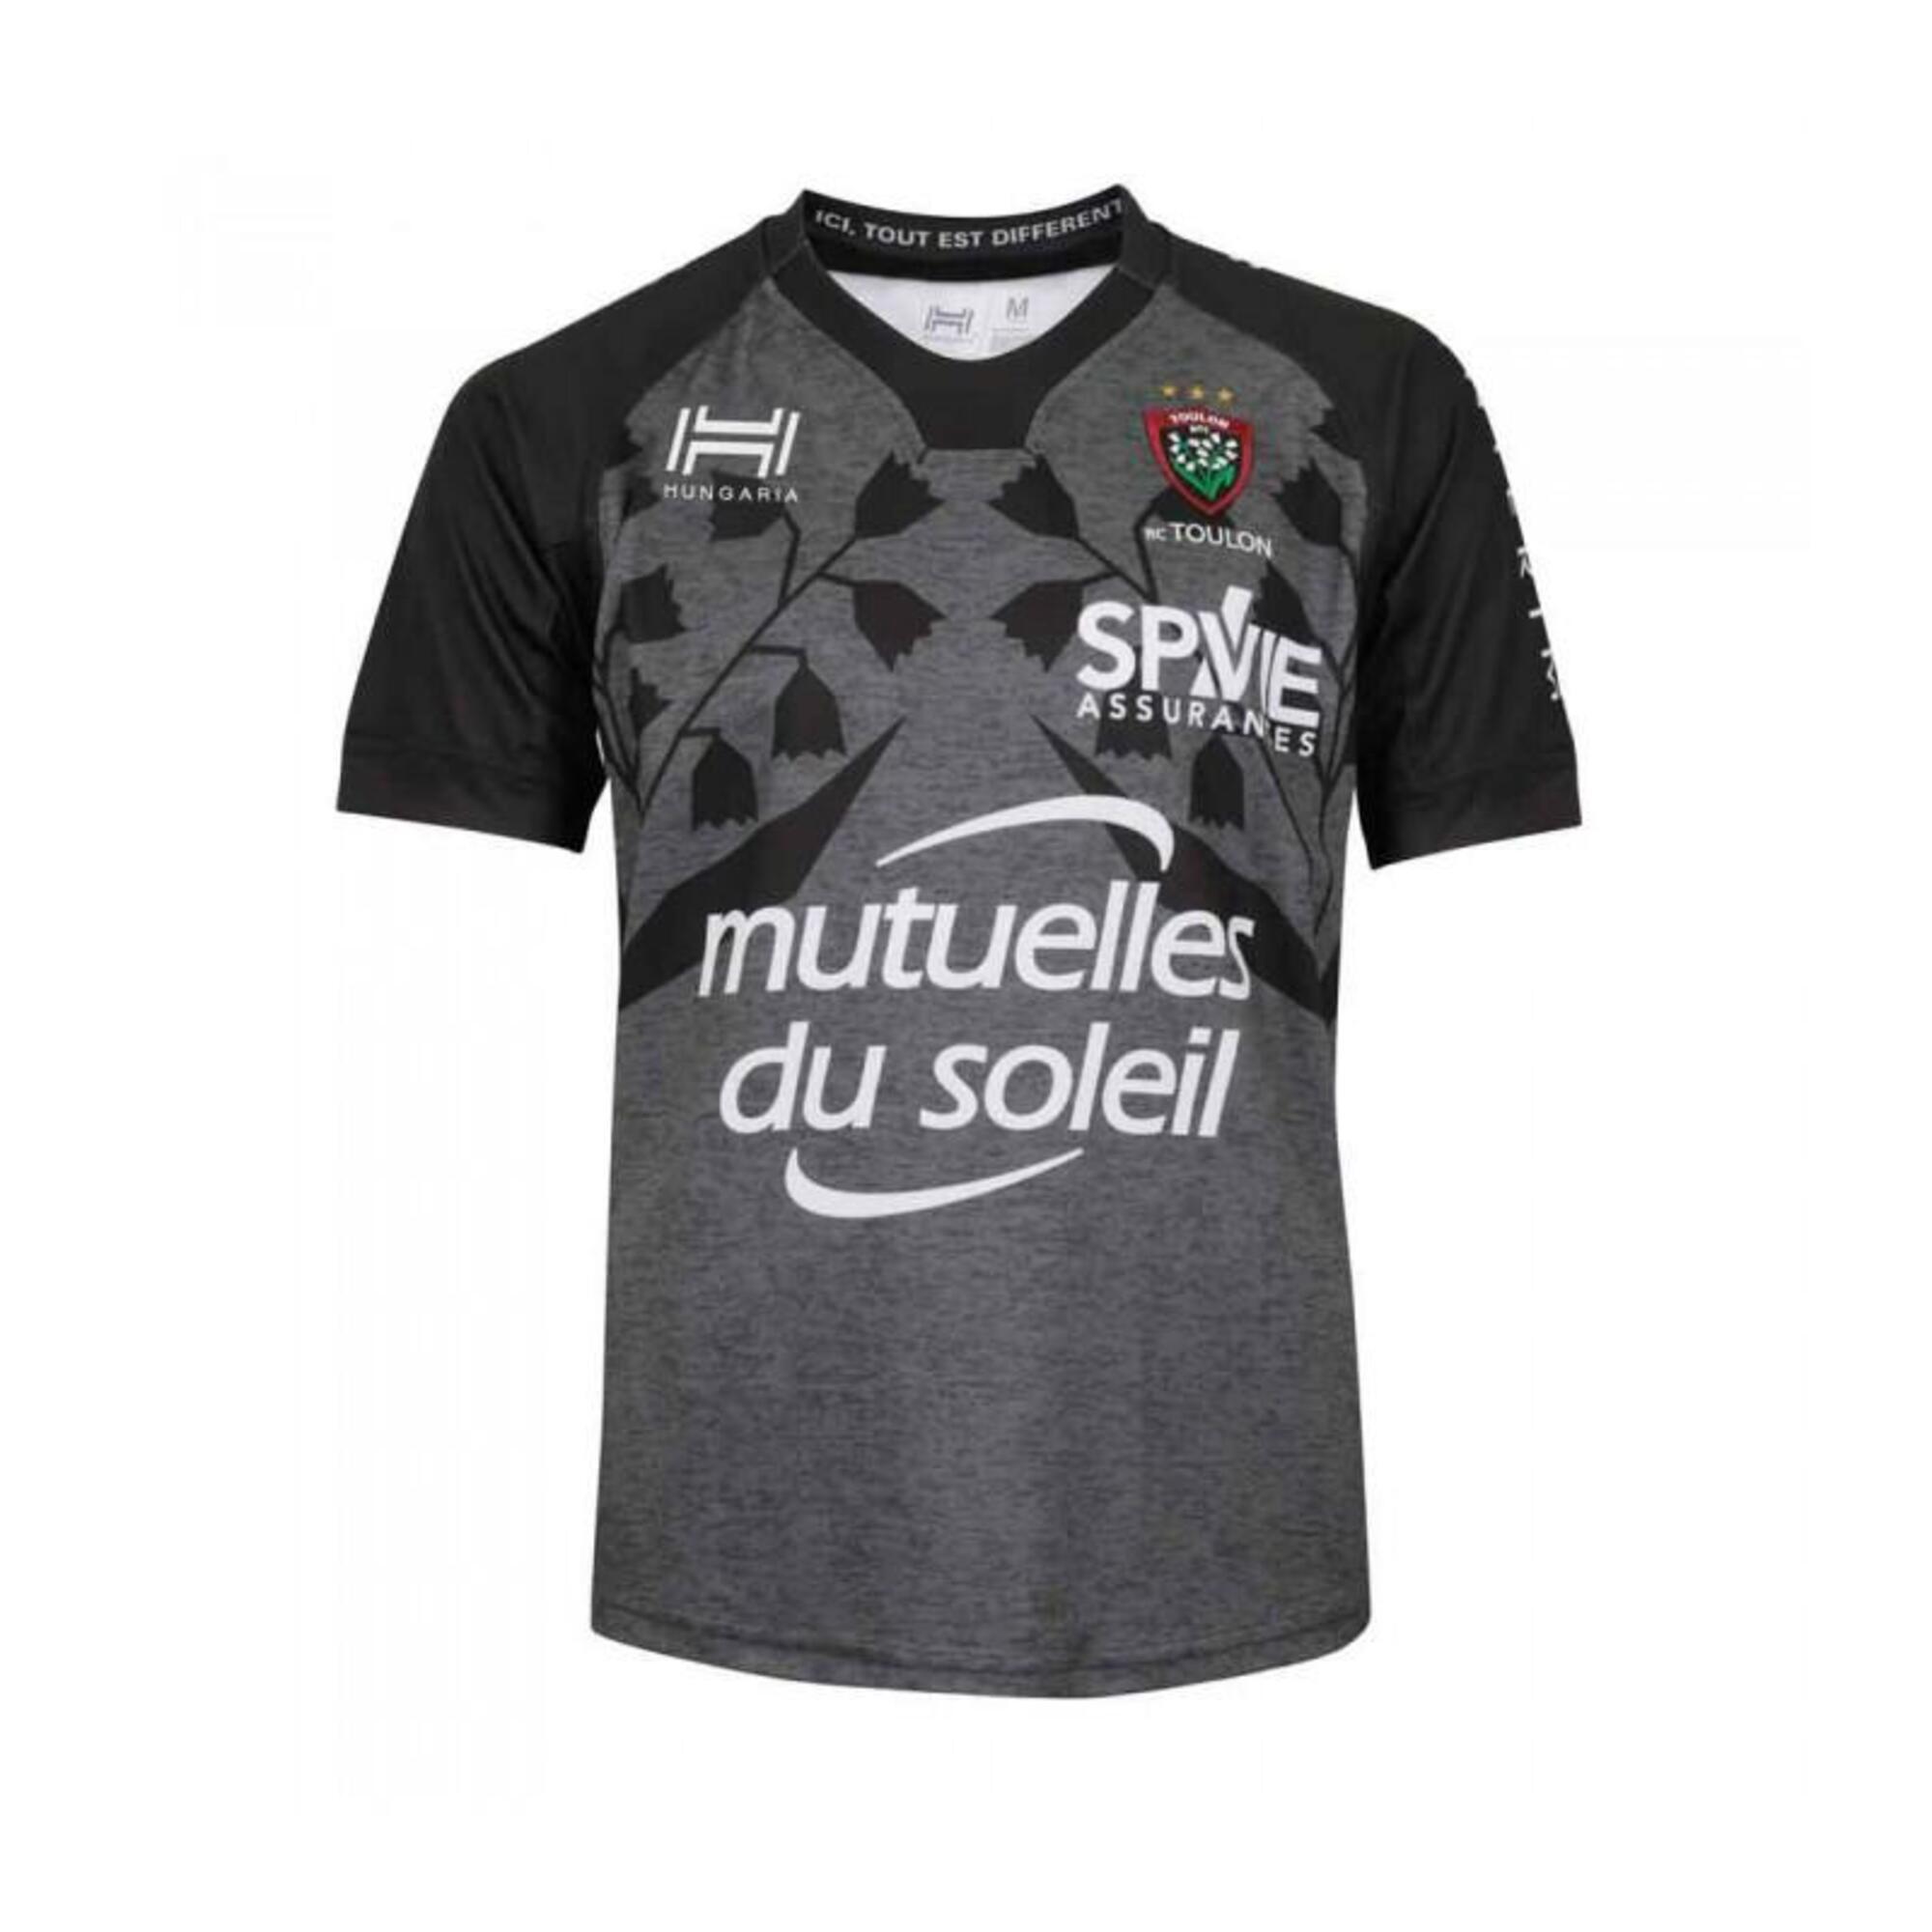 1 MAILLOT RUGBY CLUB TOULONNAIS - DOMICILE 2019/2020 HOMME - HUNGARIA